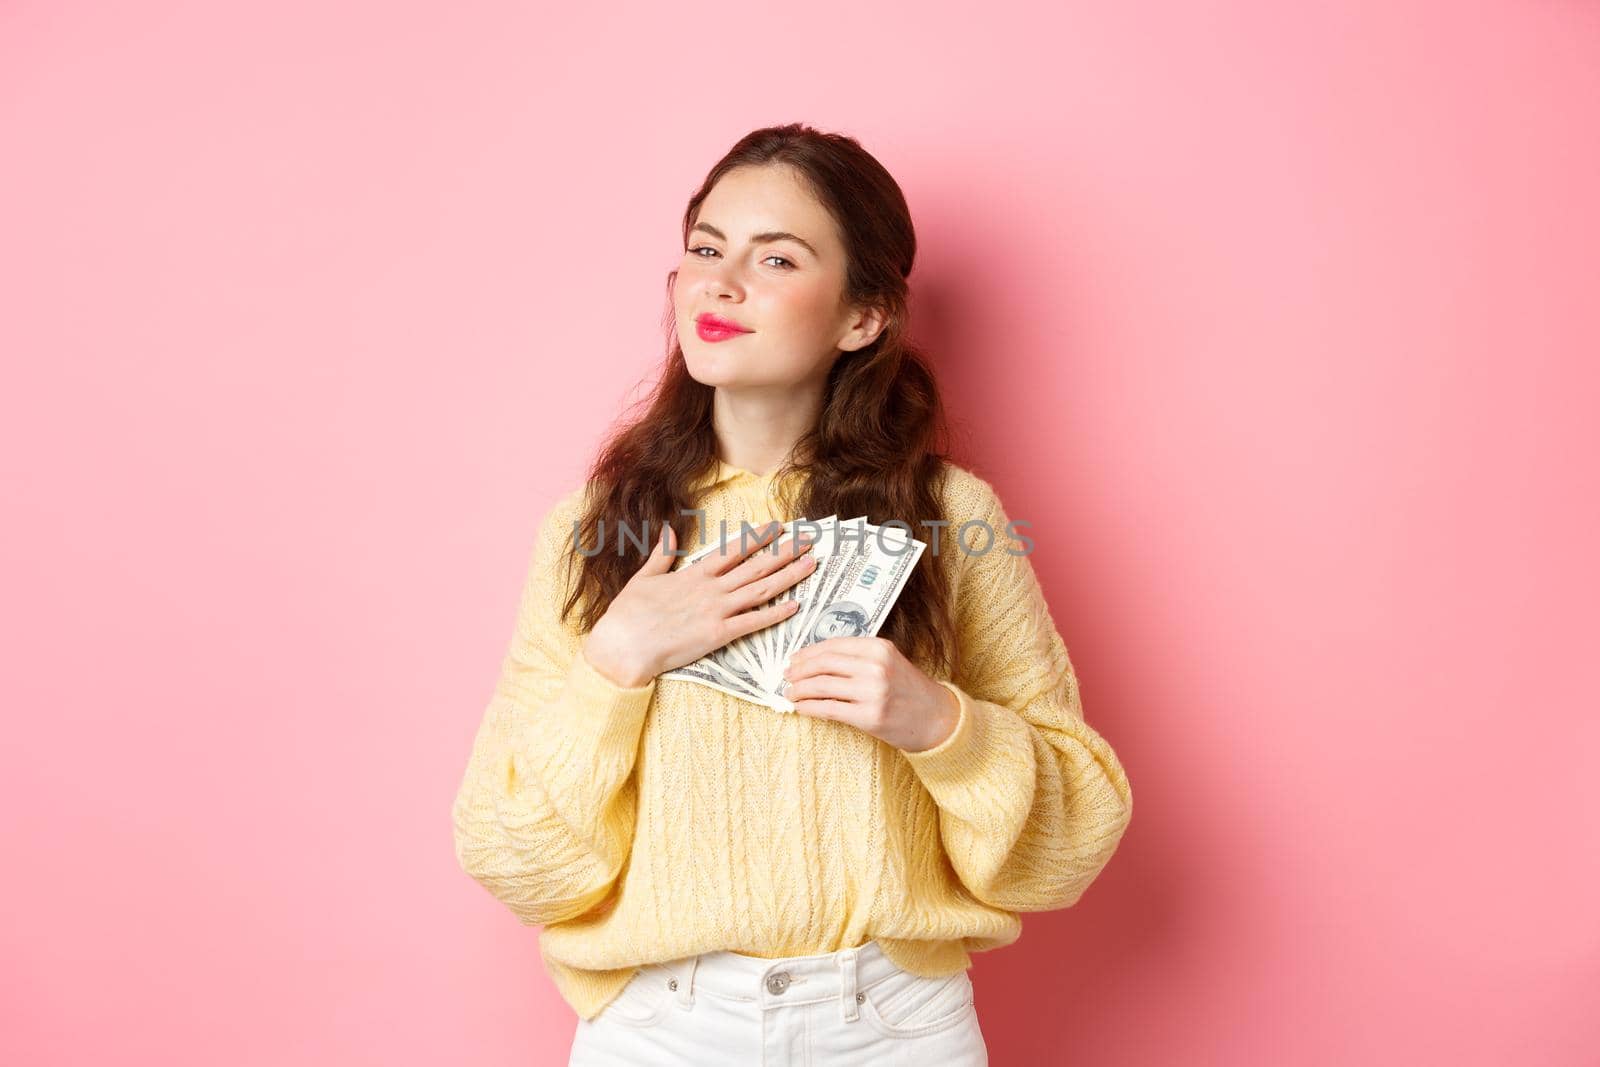 Smiling girl looks satisfied and grateful, hugging dollar bills, holding money and making smug face pleased, standing against pink background.